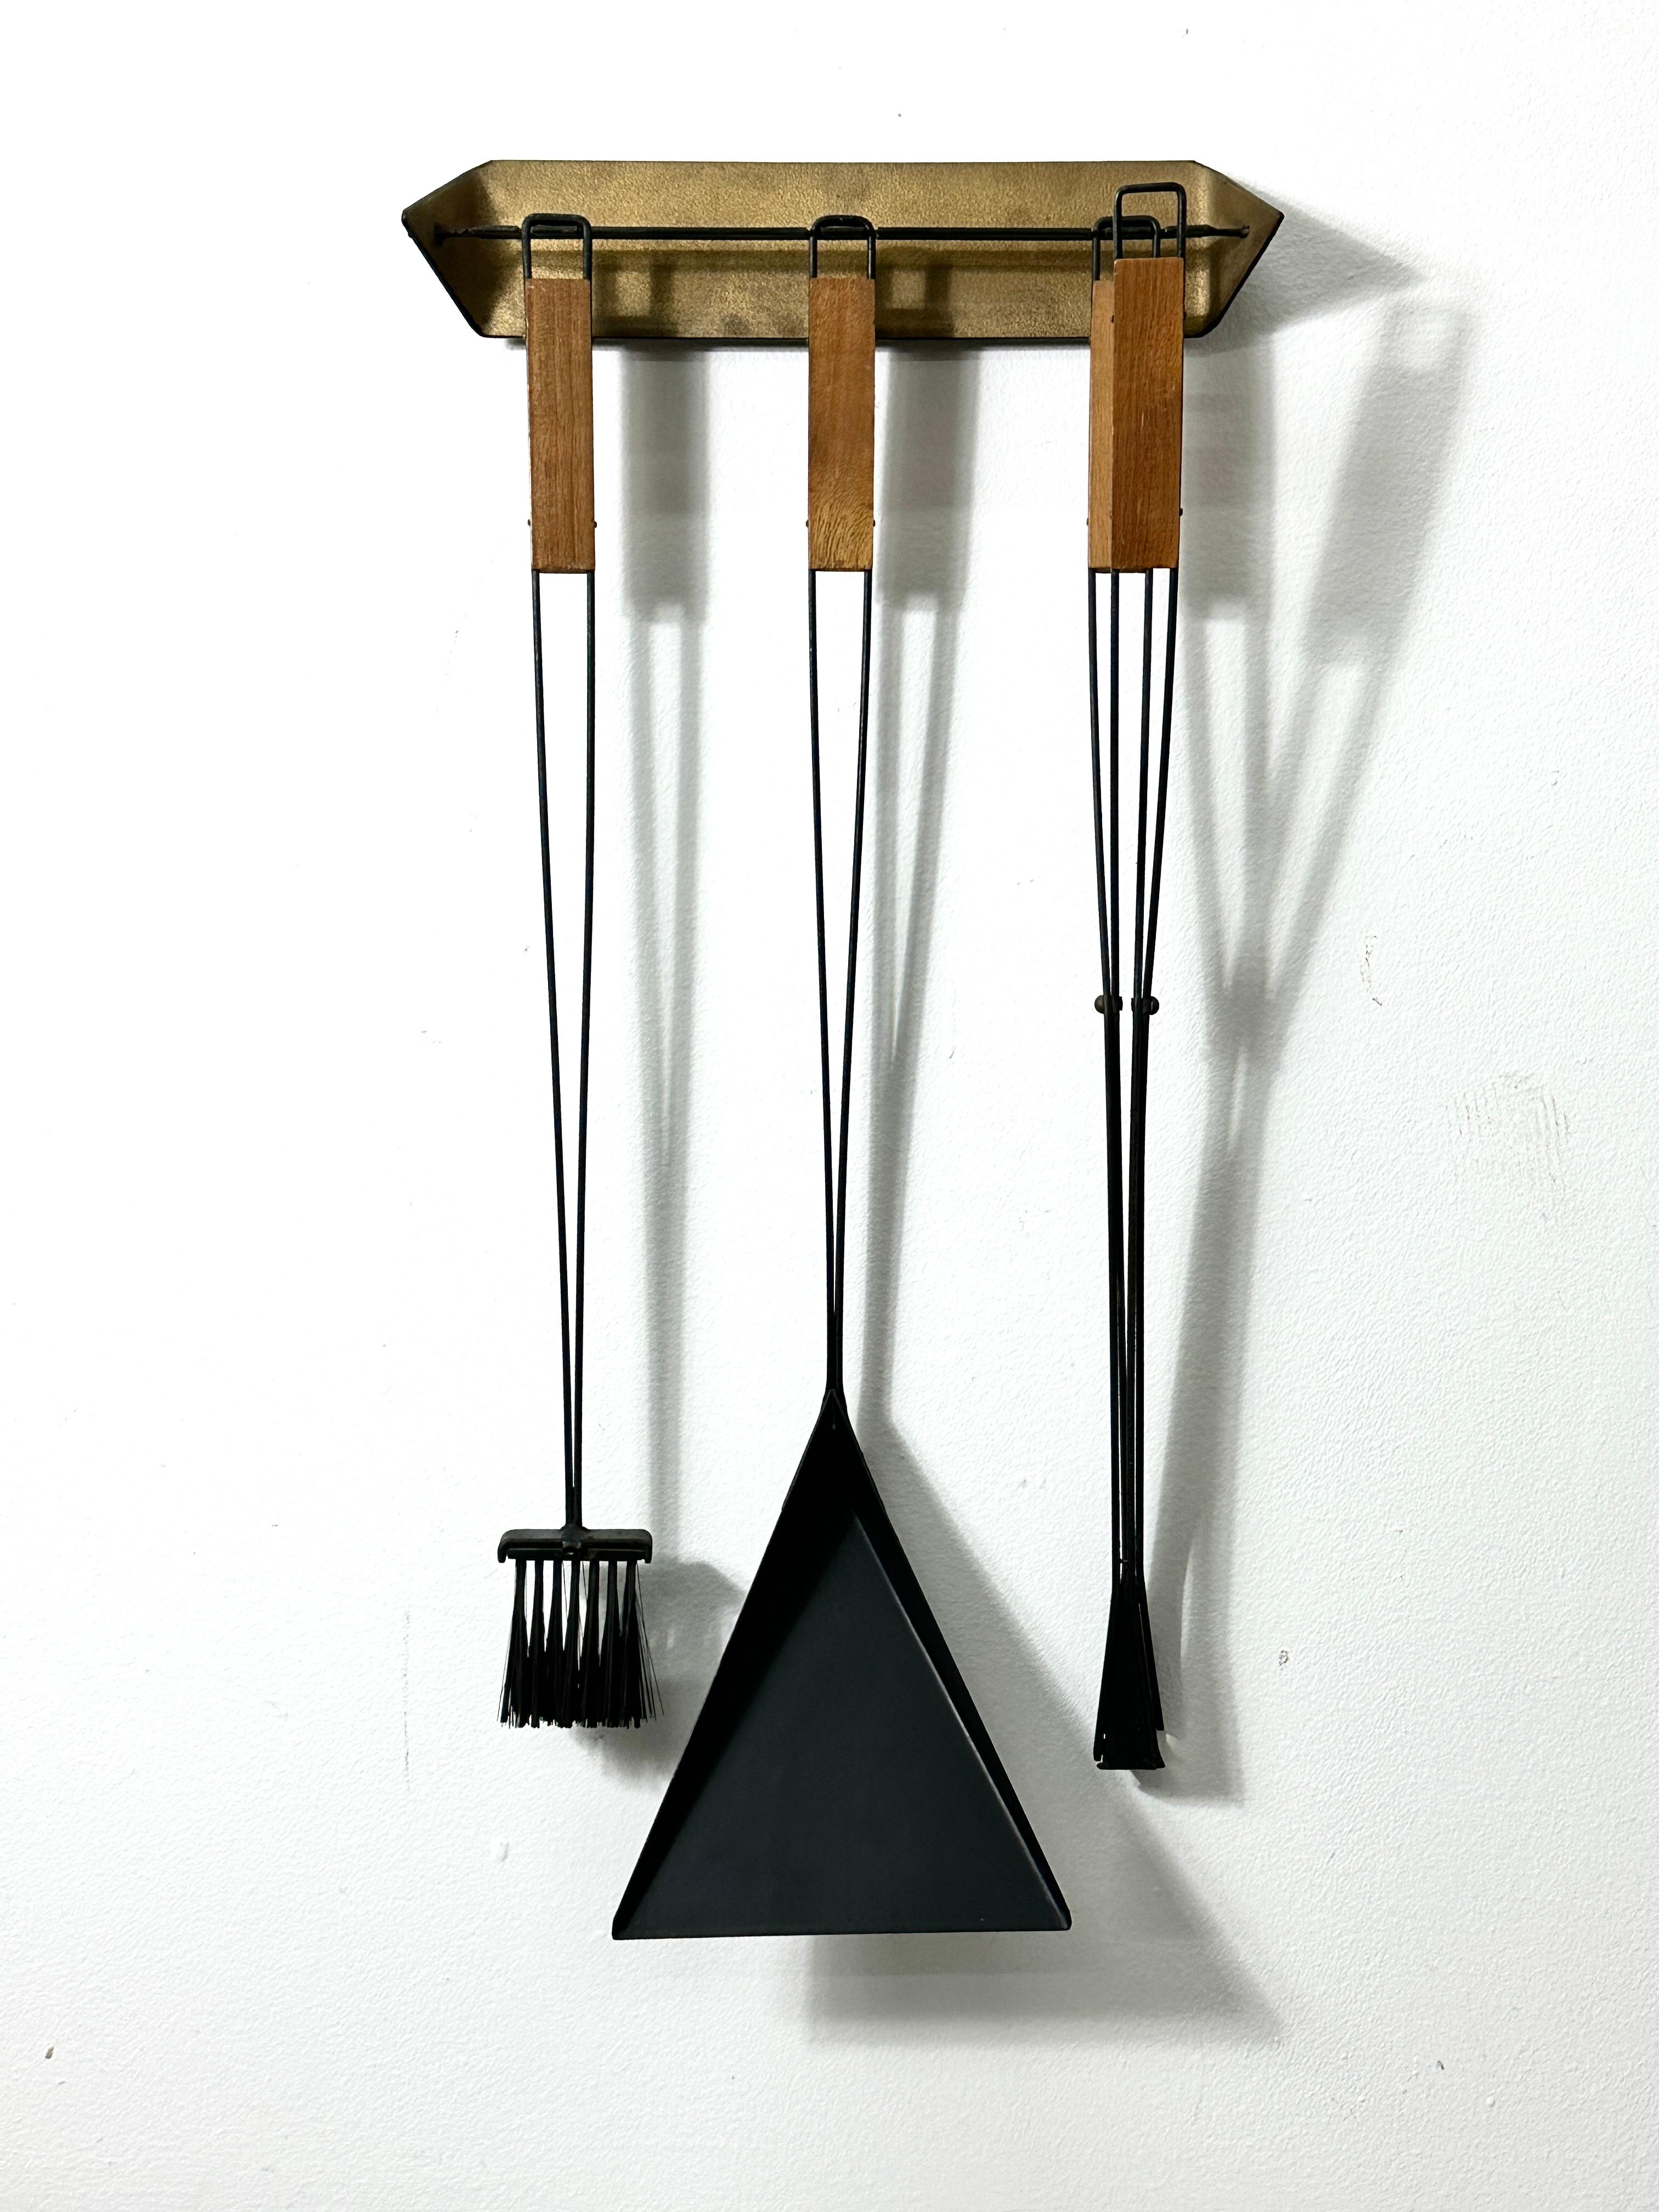 Rare wall mounted fire tool set designed by Tony Paul for Woodlin Hall circa 1950s
Black iron tools with gold edge detailing and wooden handles
Includes shovel wire brush and tongs with original wall bracket

Documented from the Fireset collection